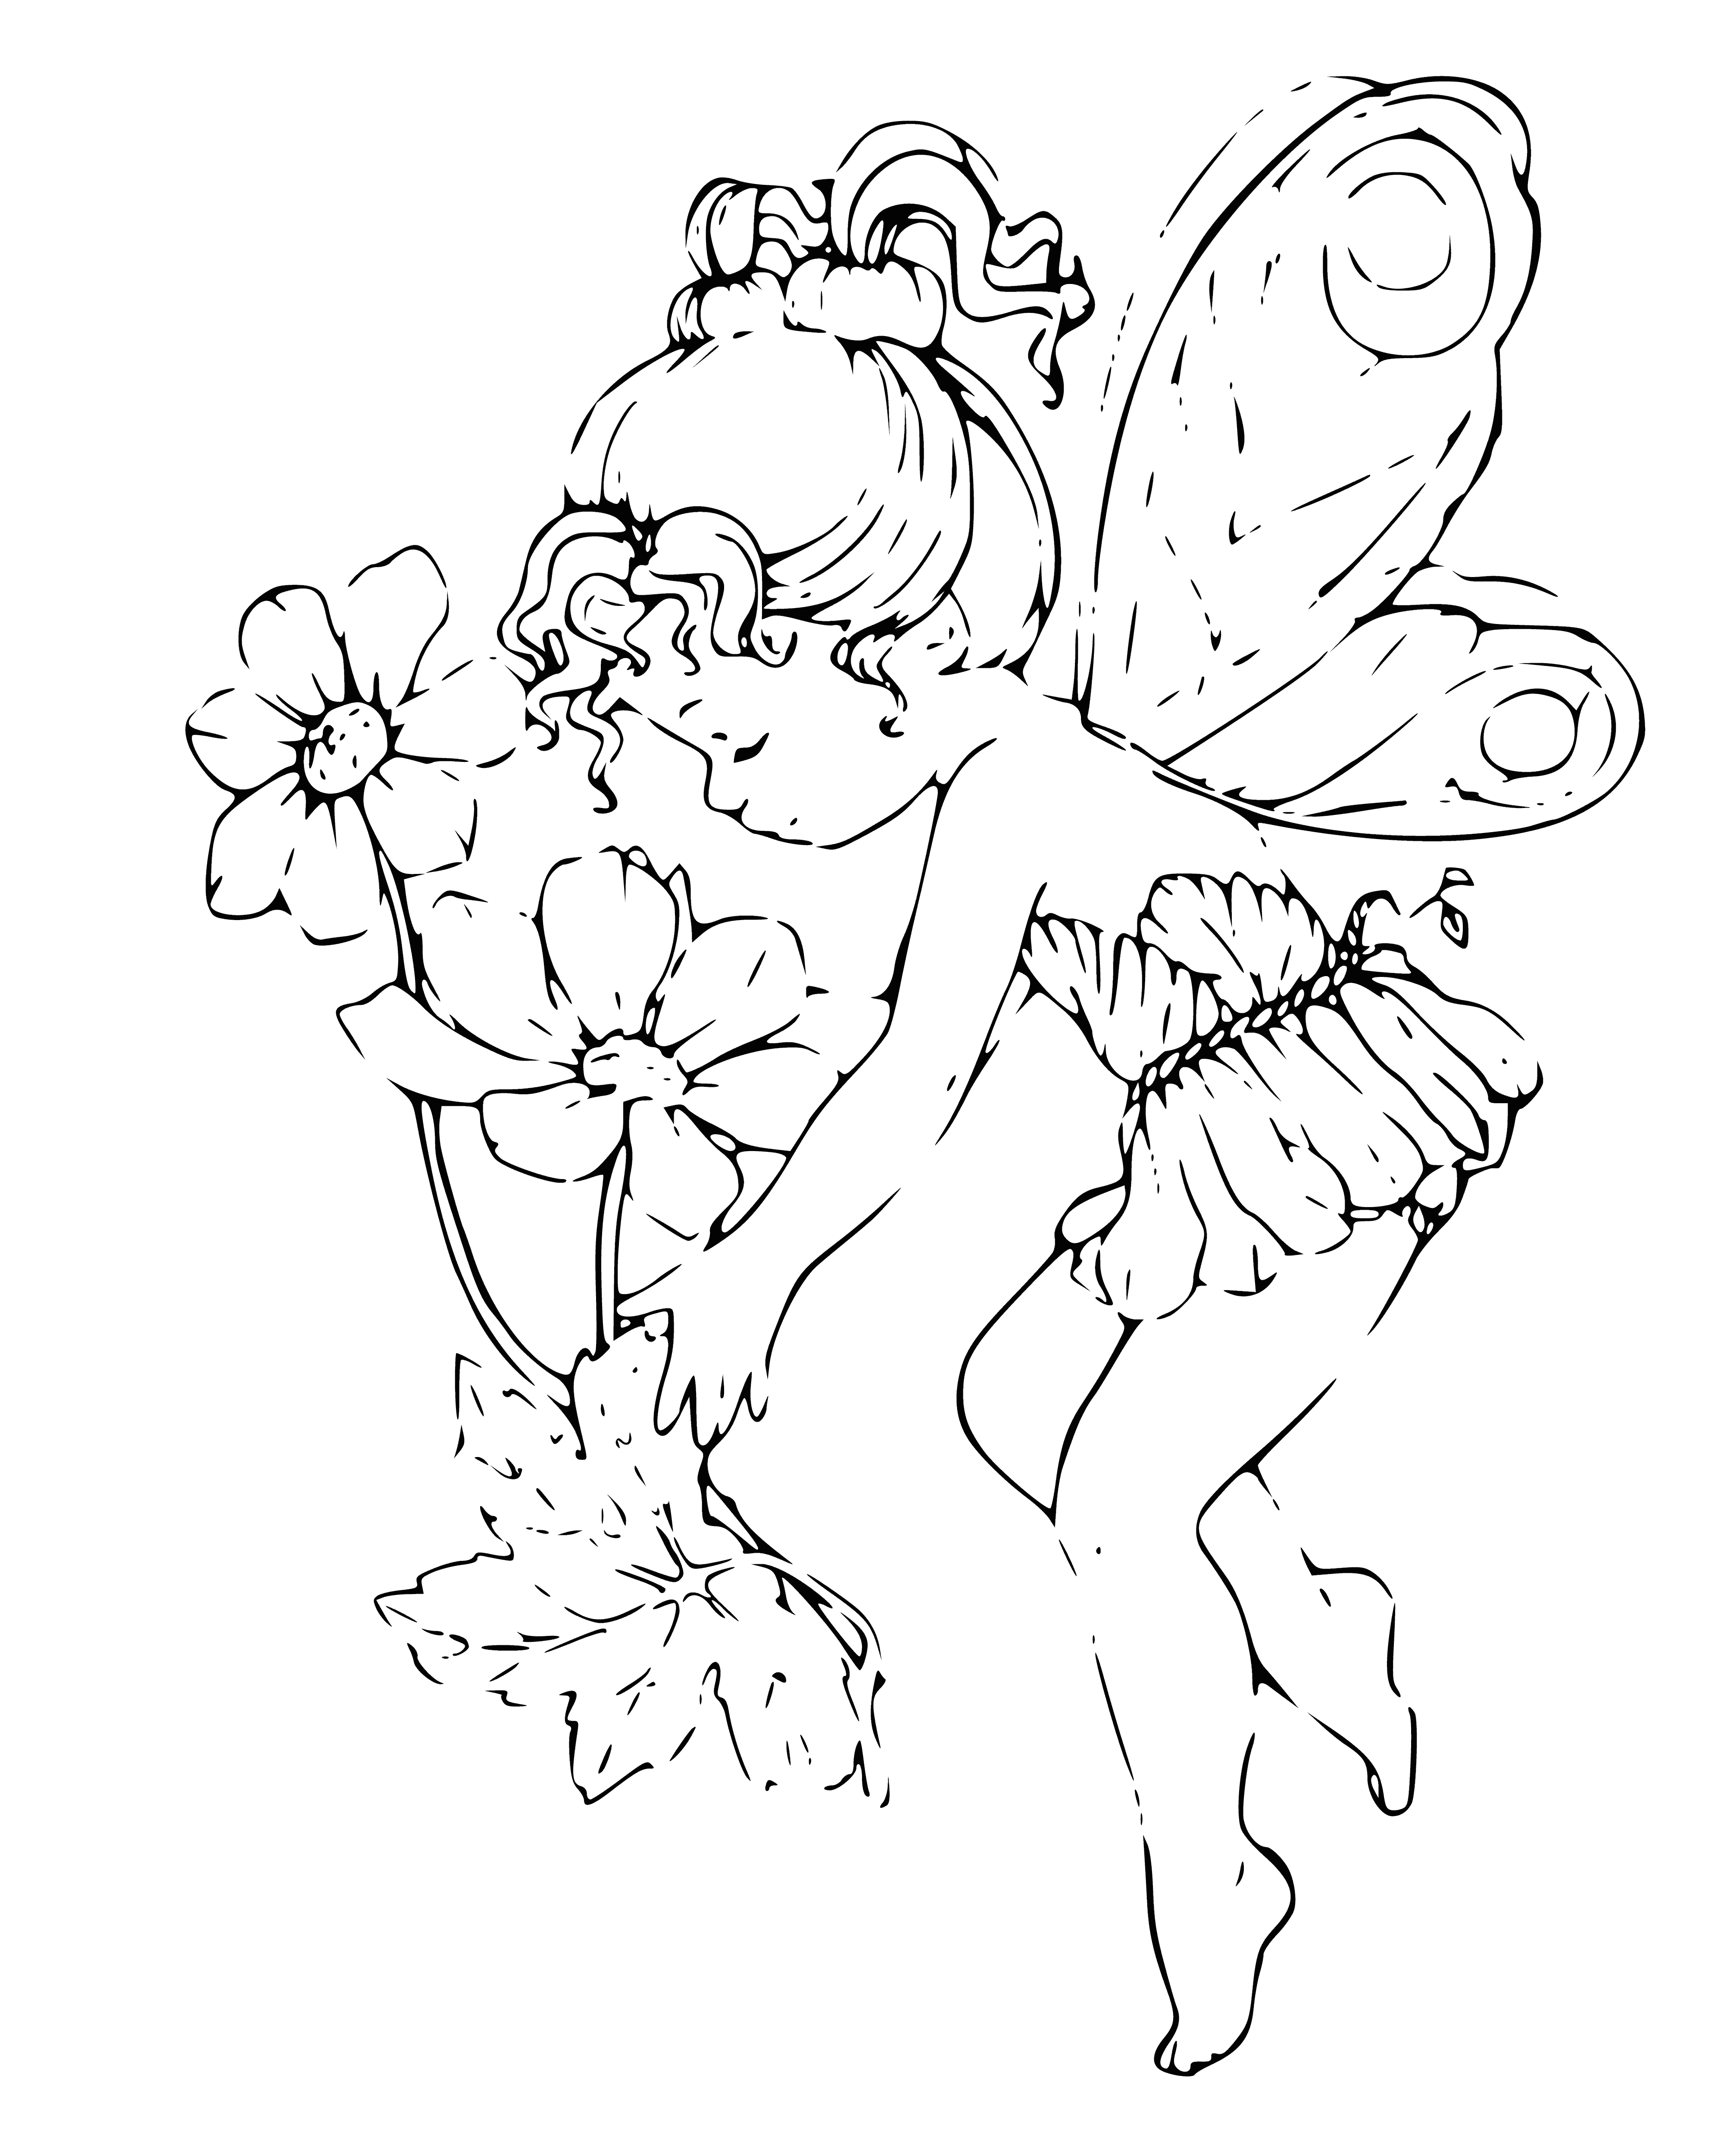 coloring page: A fairy sits on a toadstool, looking at a human child in wonder. It has shimmering blue wings and wears a green dress with yellow trim. Both it's hands clasped, and its hair in two braids.